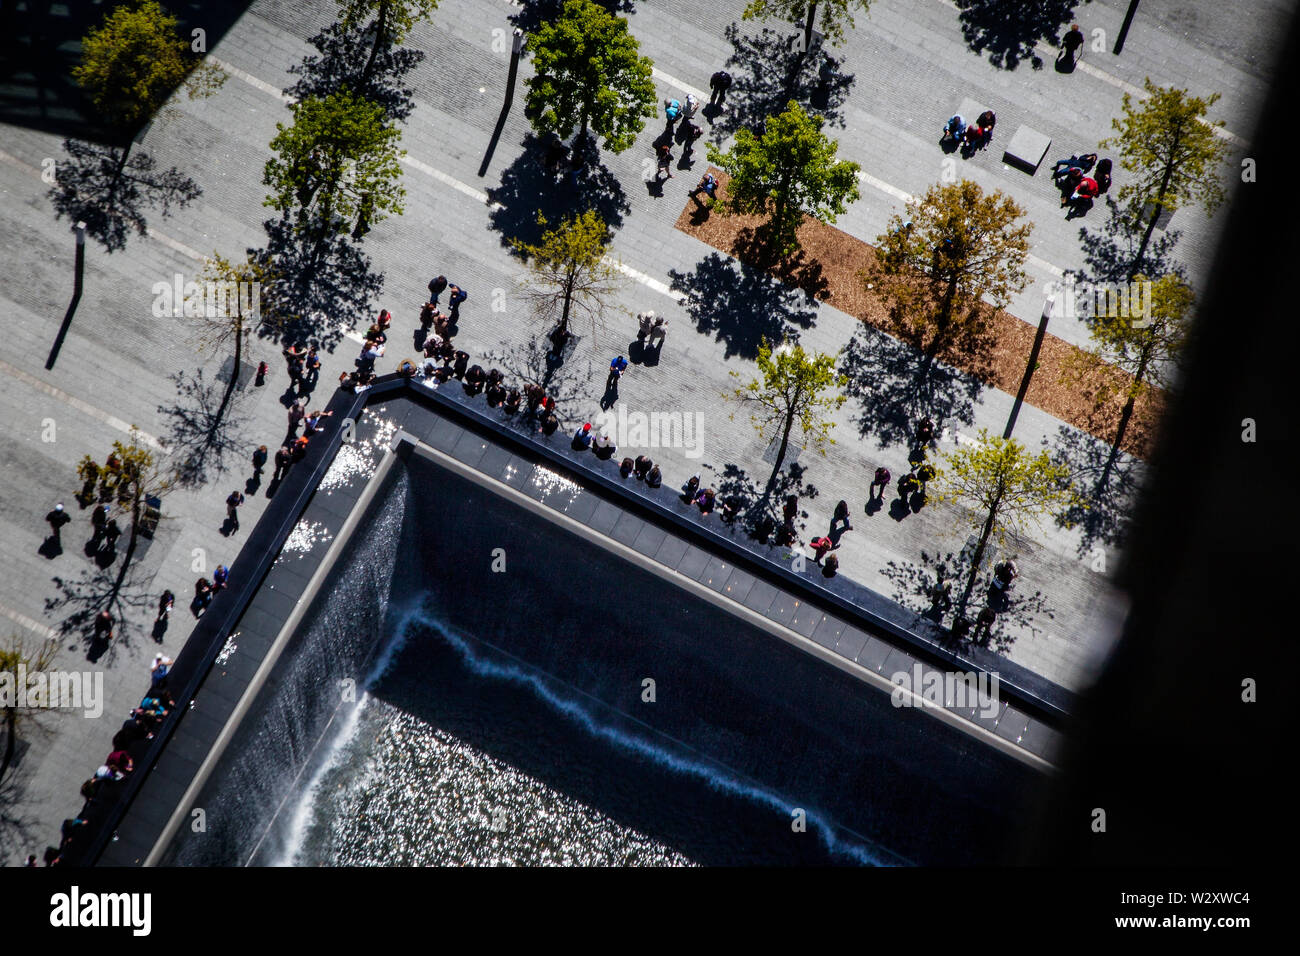 The reflecting pools in the 9/11 Memorial Park at Ground Zero as seen from the 73rd floor of the WTC Tower under construction. Stock Photo